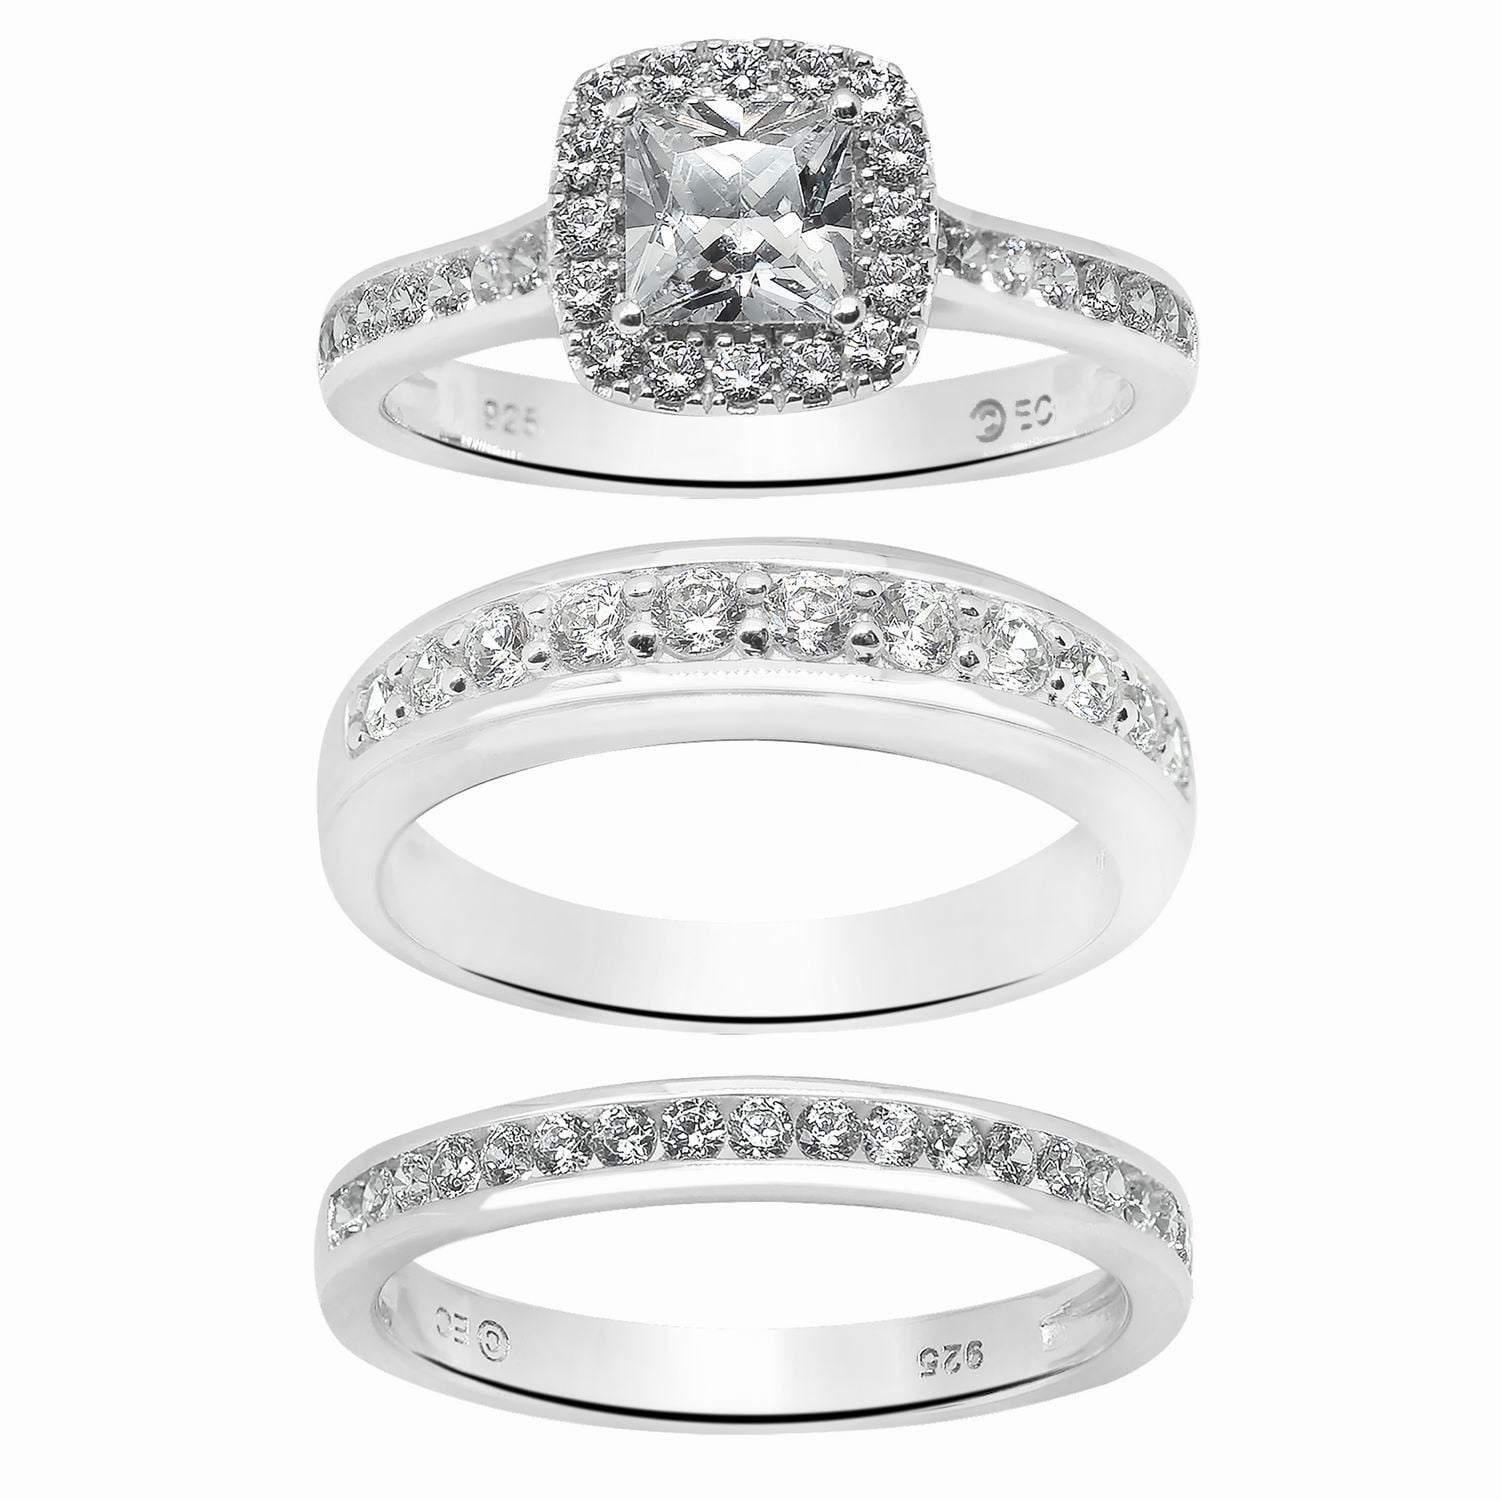 3ct Cushion Cut Simulated Diamond Engagement Wedding Ring 925 Sterling Silver 